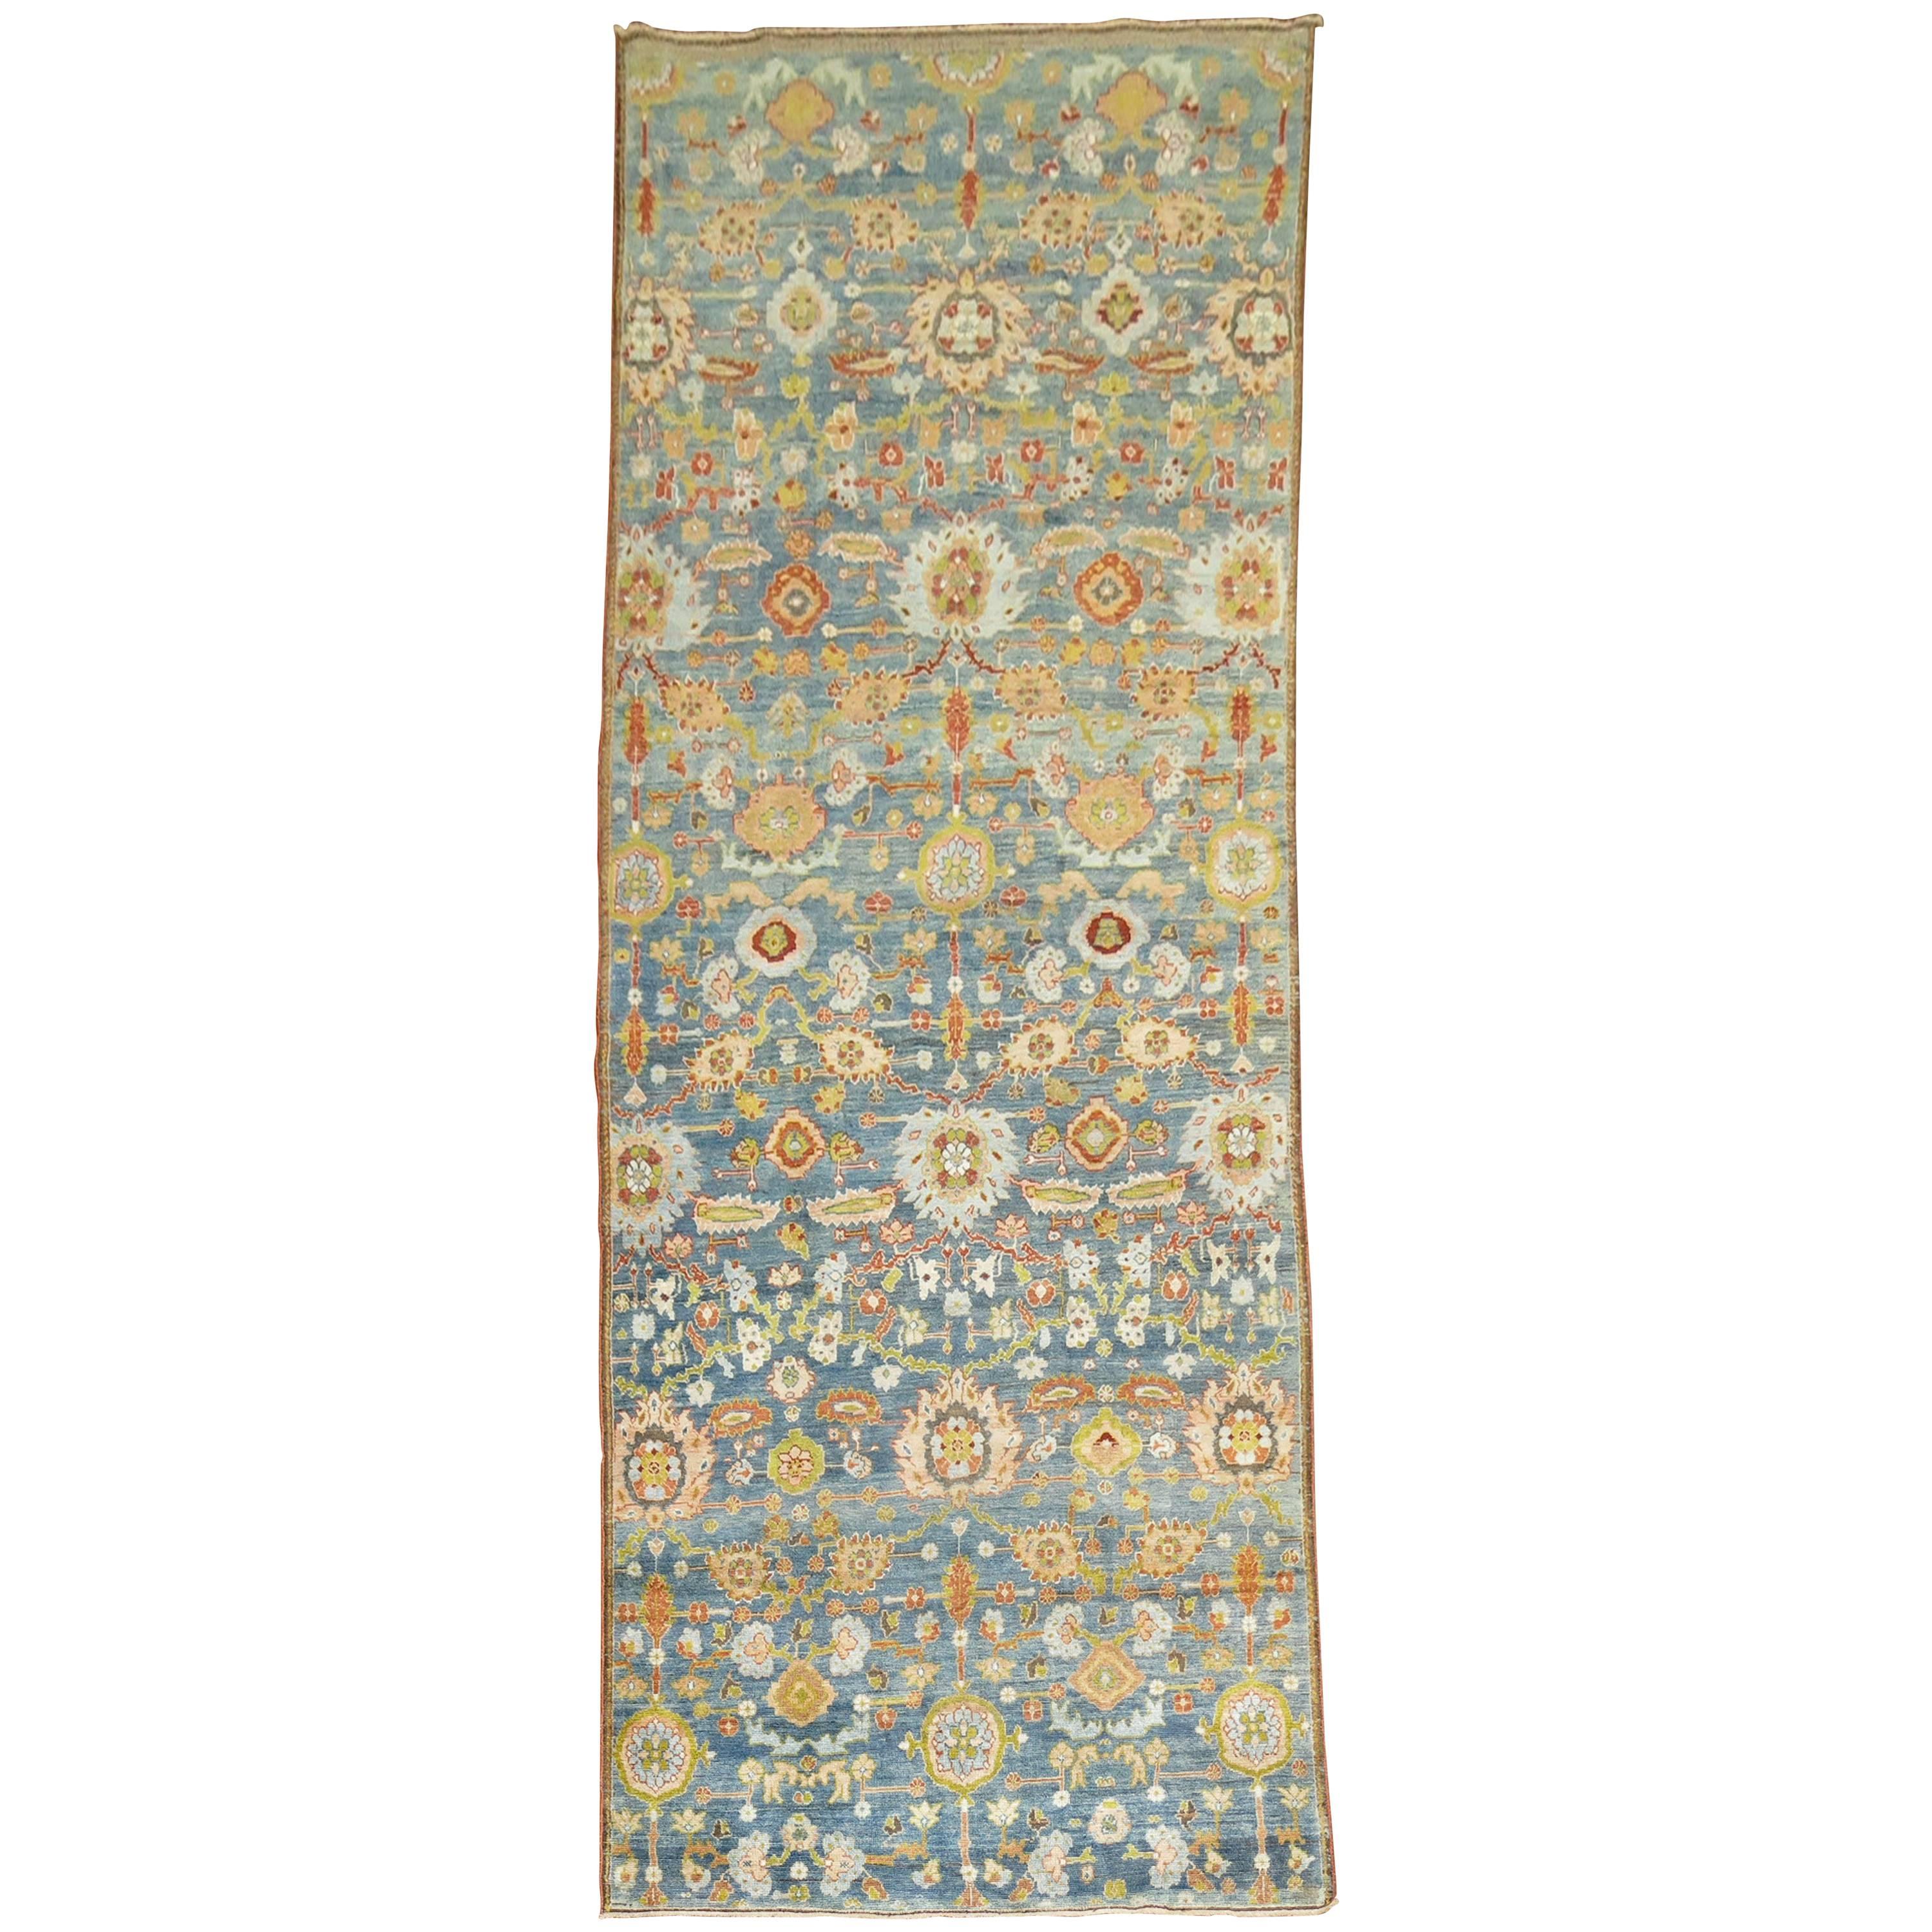 Zabih Collection Stunning Antique Persian Malayer Gallery Rug